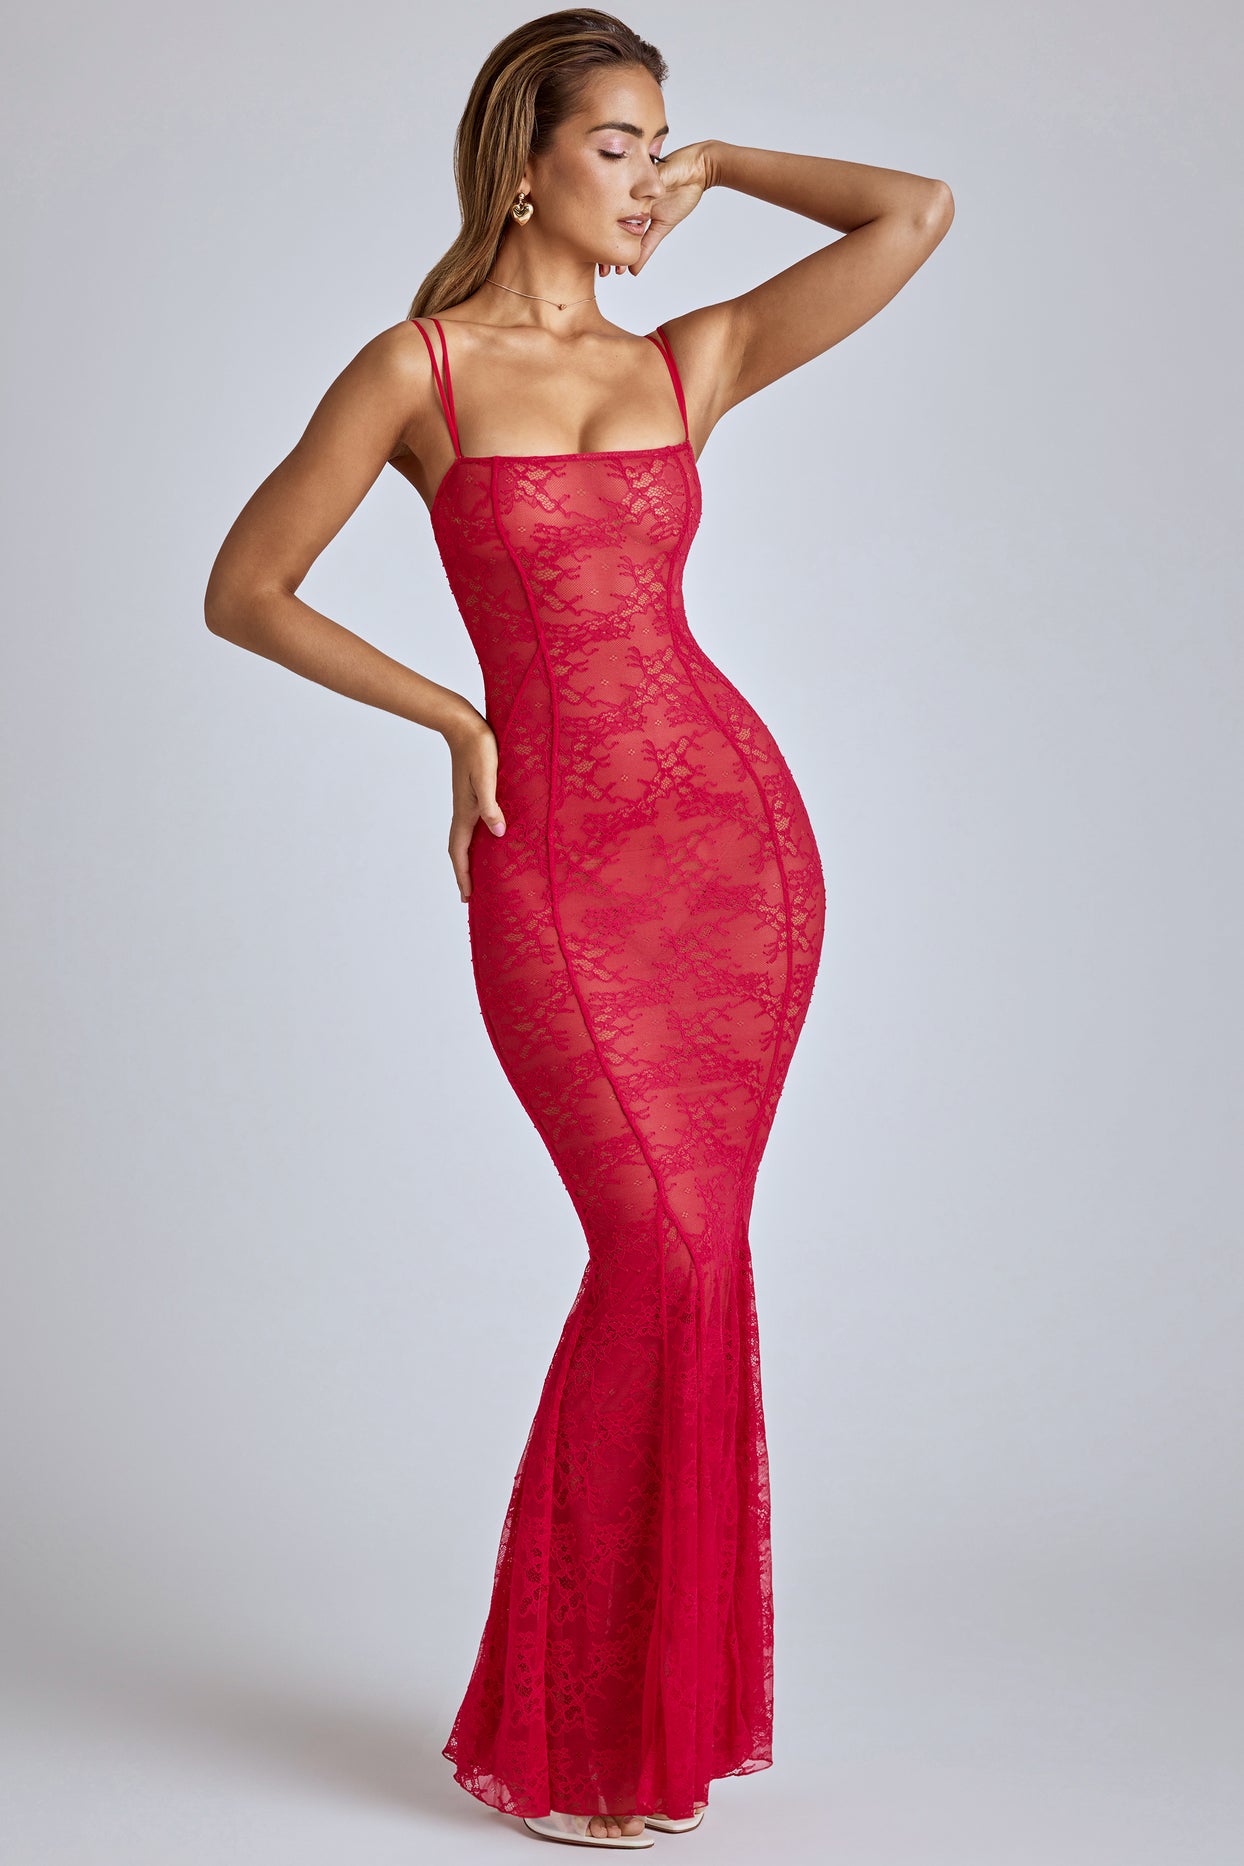 Sheer Lace Fishtail Gown in Cherry Red